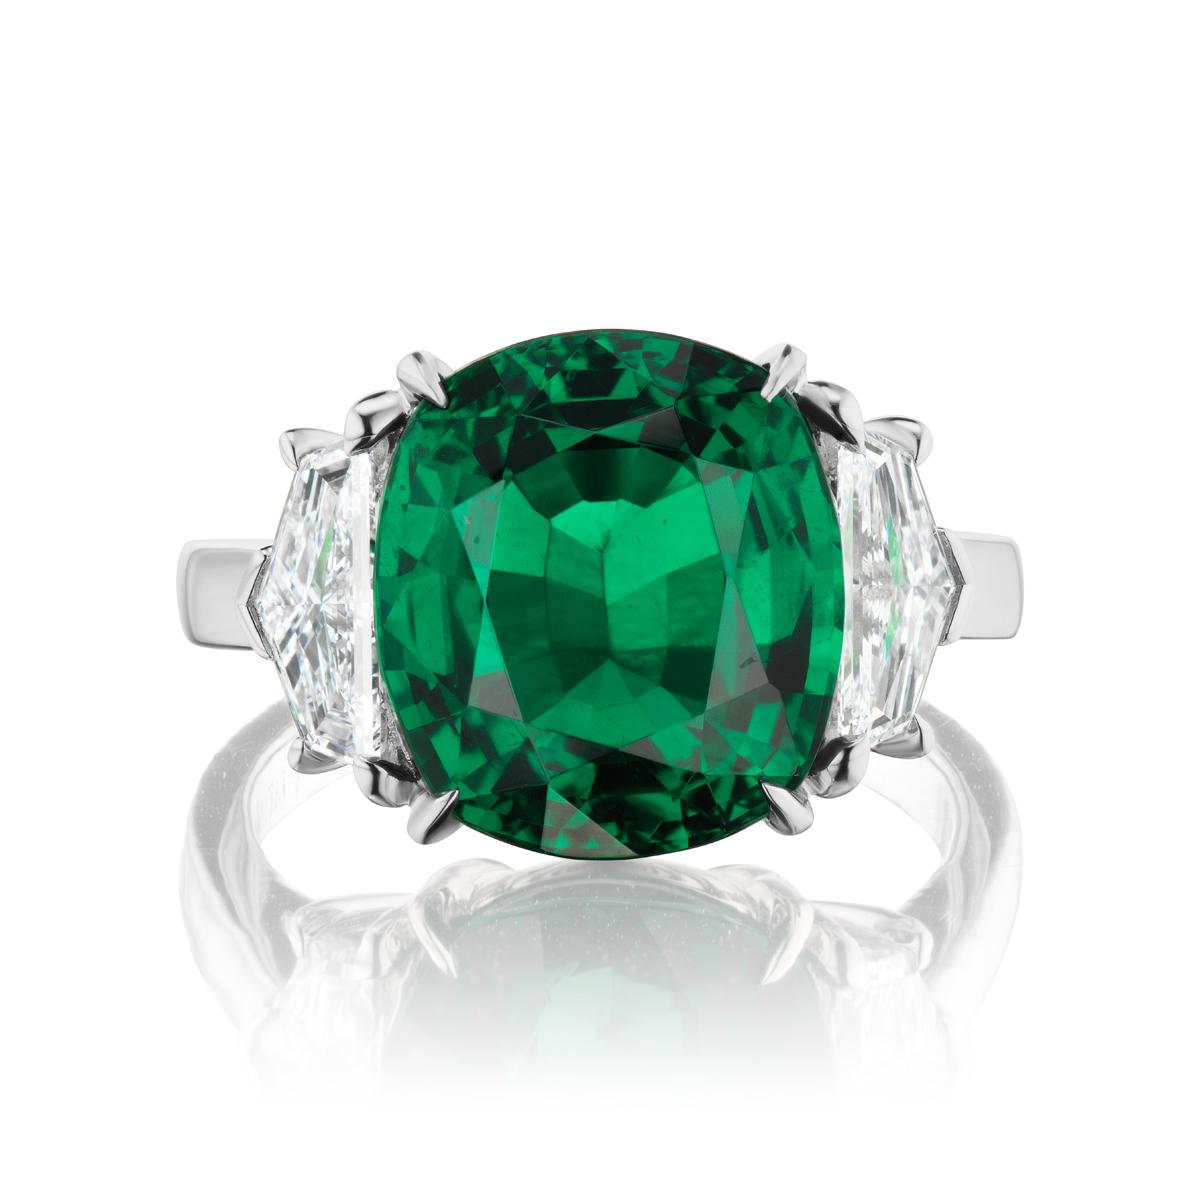 A simply stunning and substantial GRS Certified Zambian Emerald is the star of this classic platinum ring. The 7.28ct vibrant green Emerald is embraced on either side by a high quality shield cut diamond 0.54cts each E,F /VVs.
Item:	#